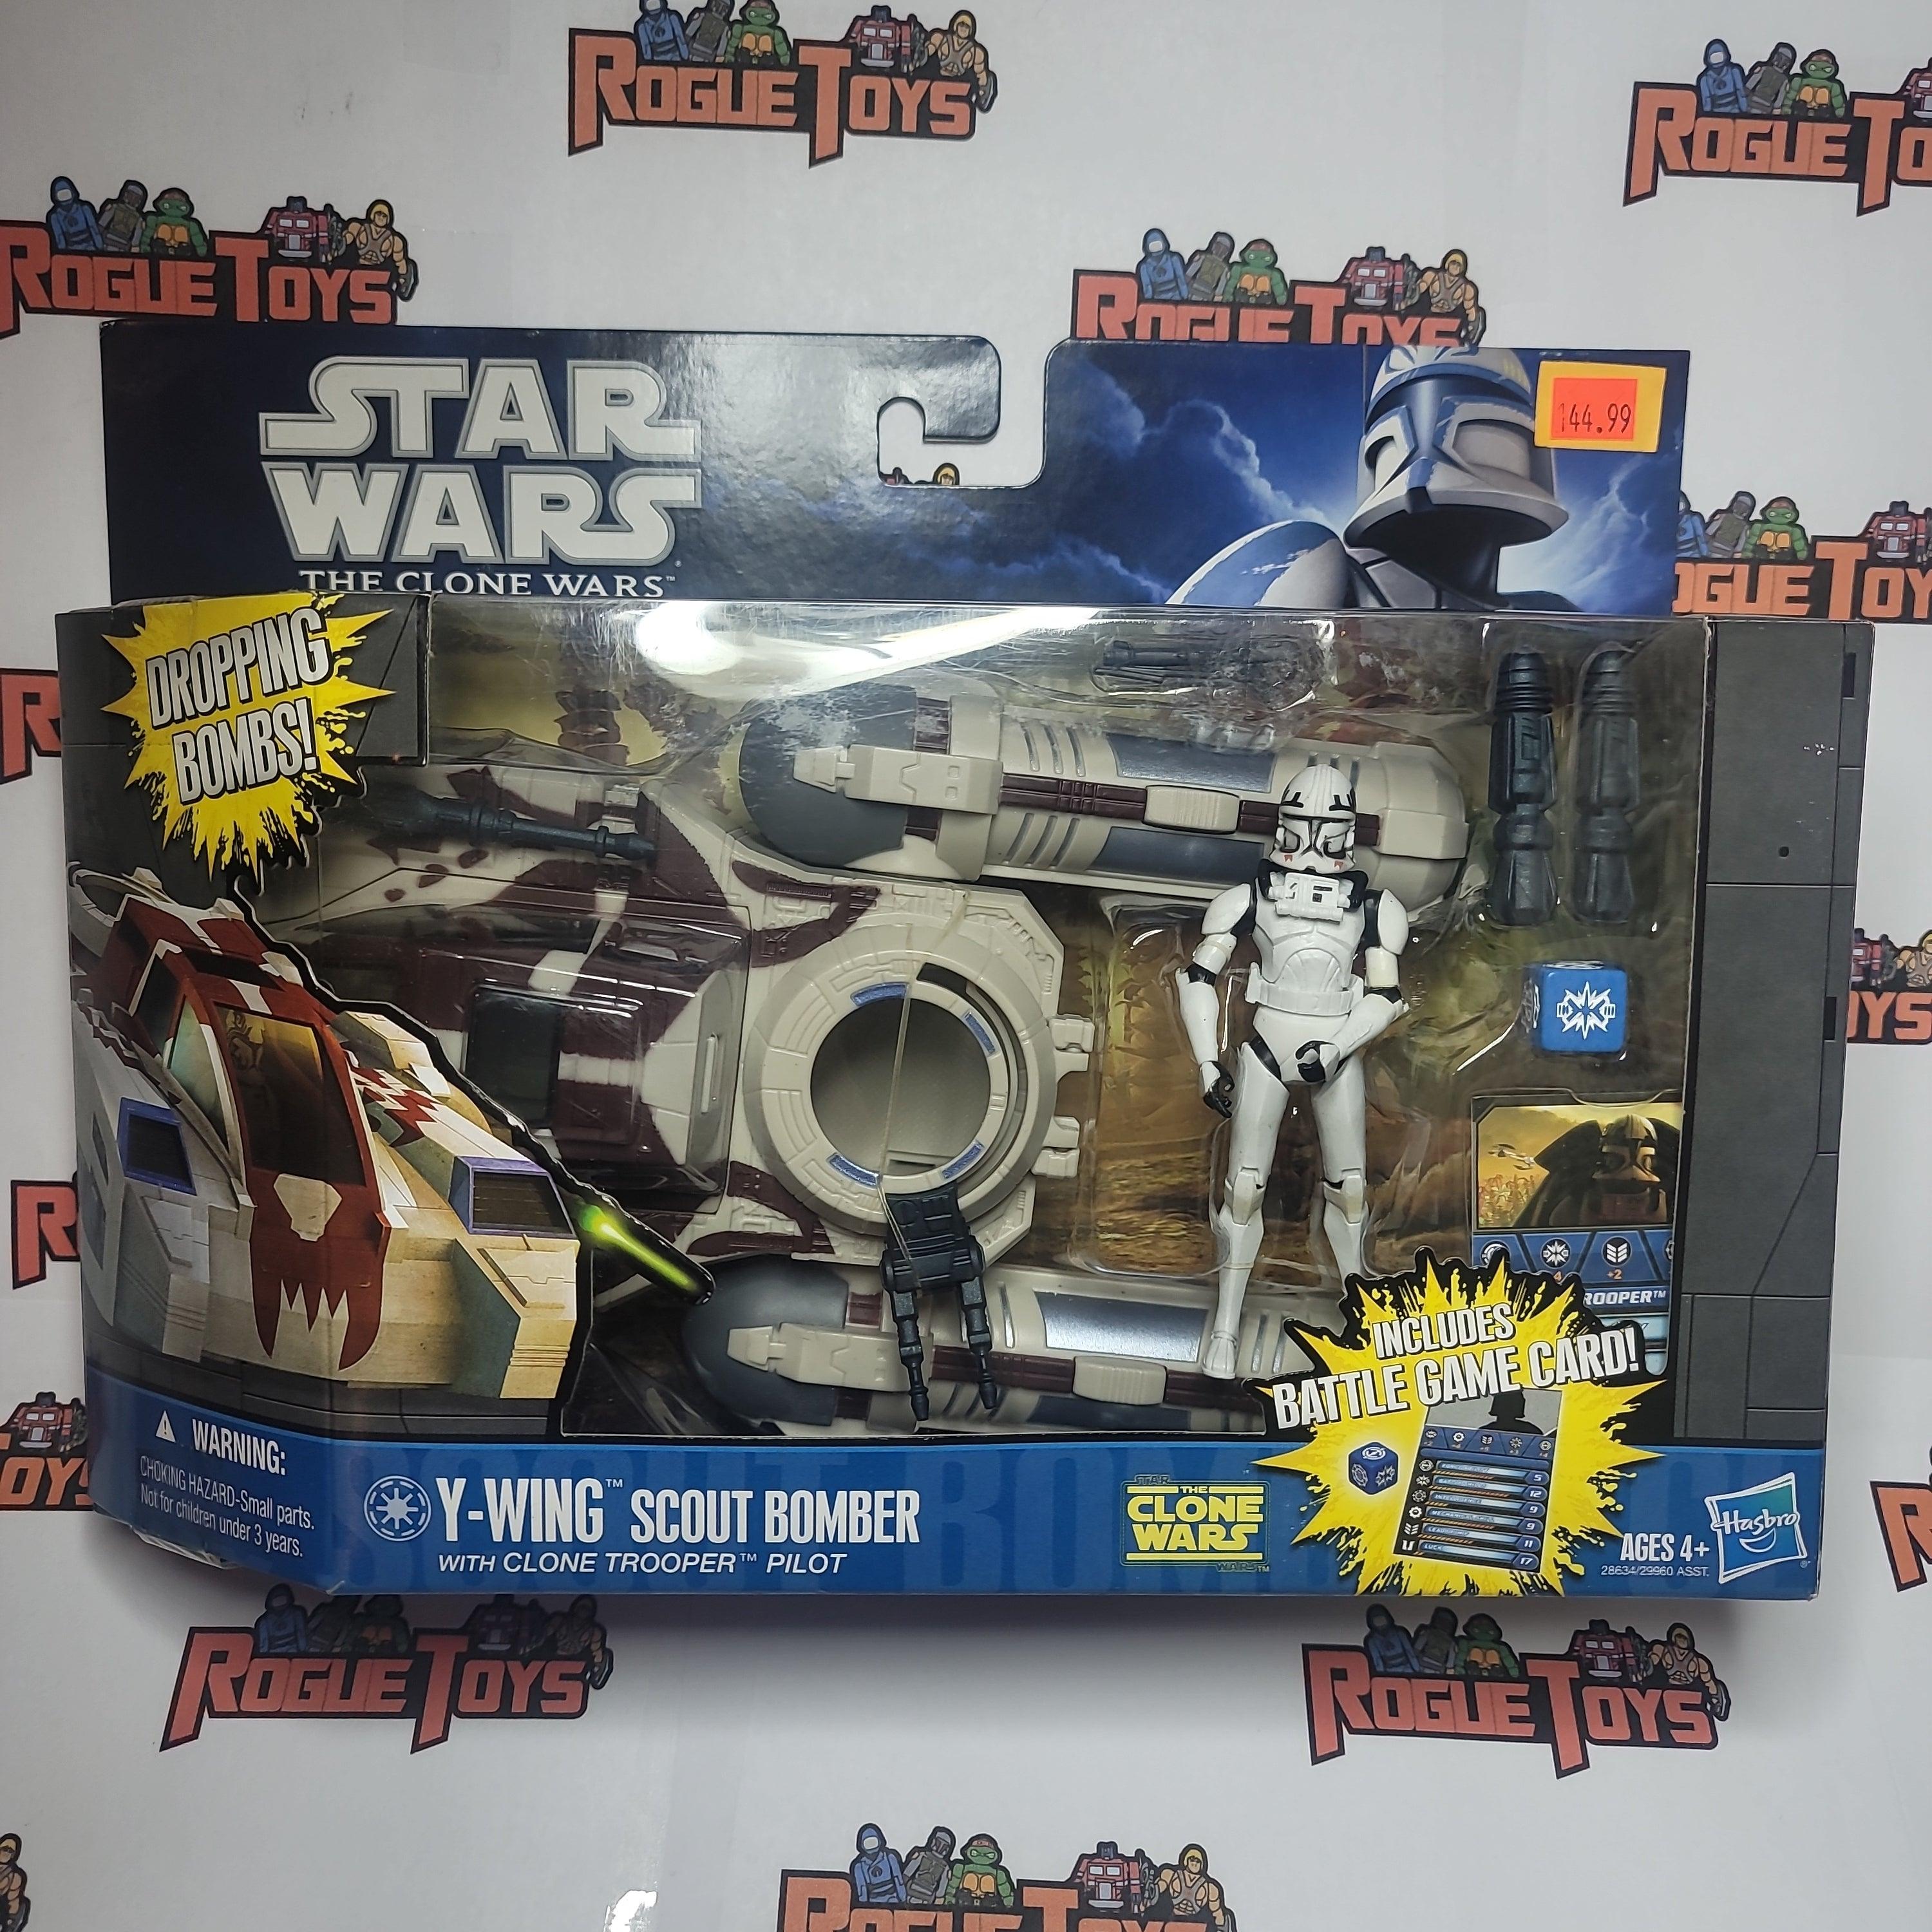 Hasbro Star Wars the clone Wars y-wing scout bomber - Rogue Toys